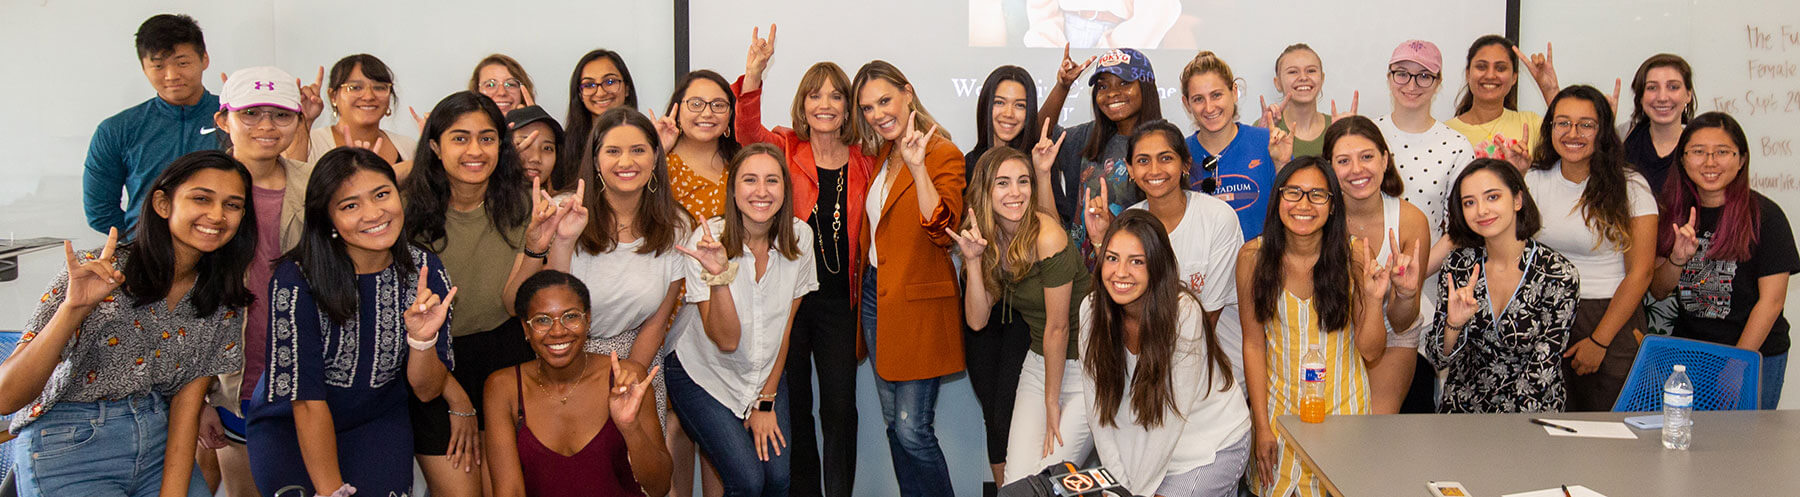 Kendra Scott taking a group photo with her students